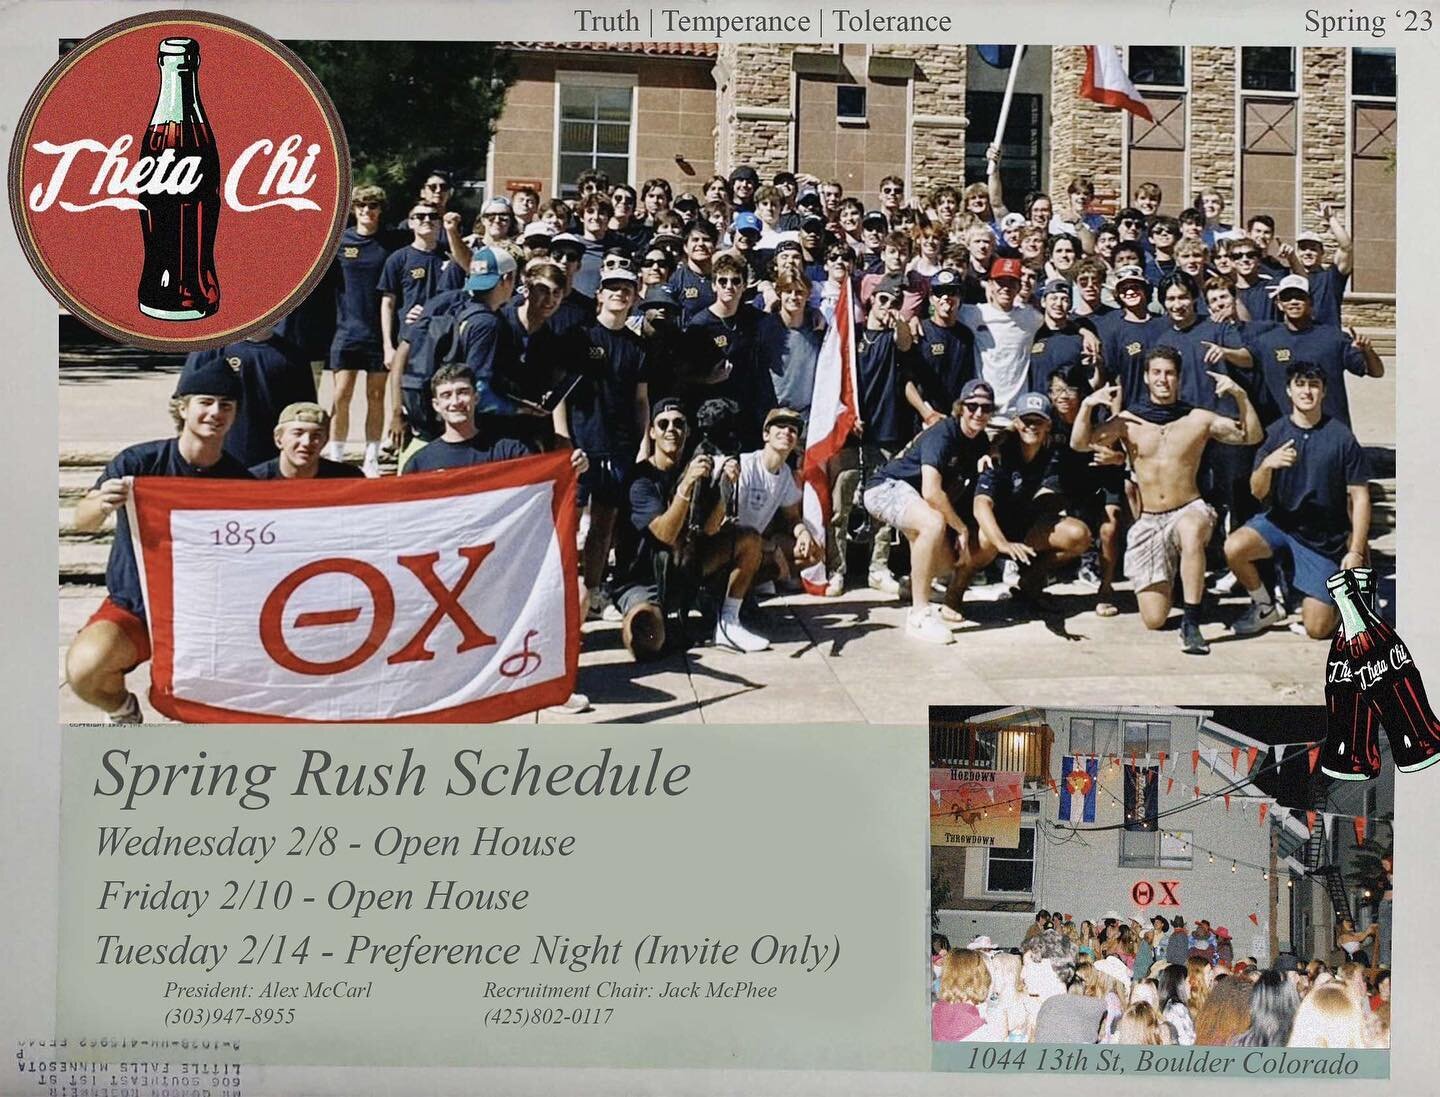 Rush week is here, gentlemen. Stop by 1044 13th Street any time from 5-8pm to meet the brothers. Best of luck 🐍⚔️